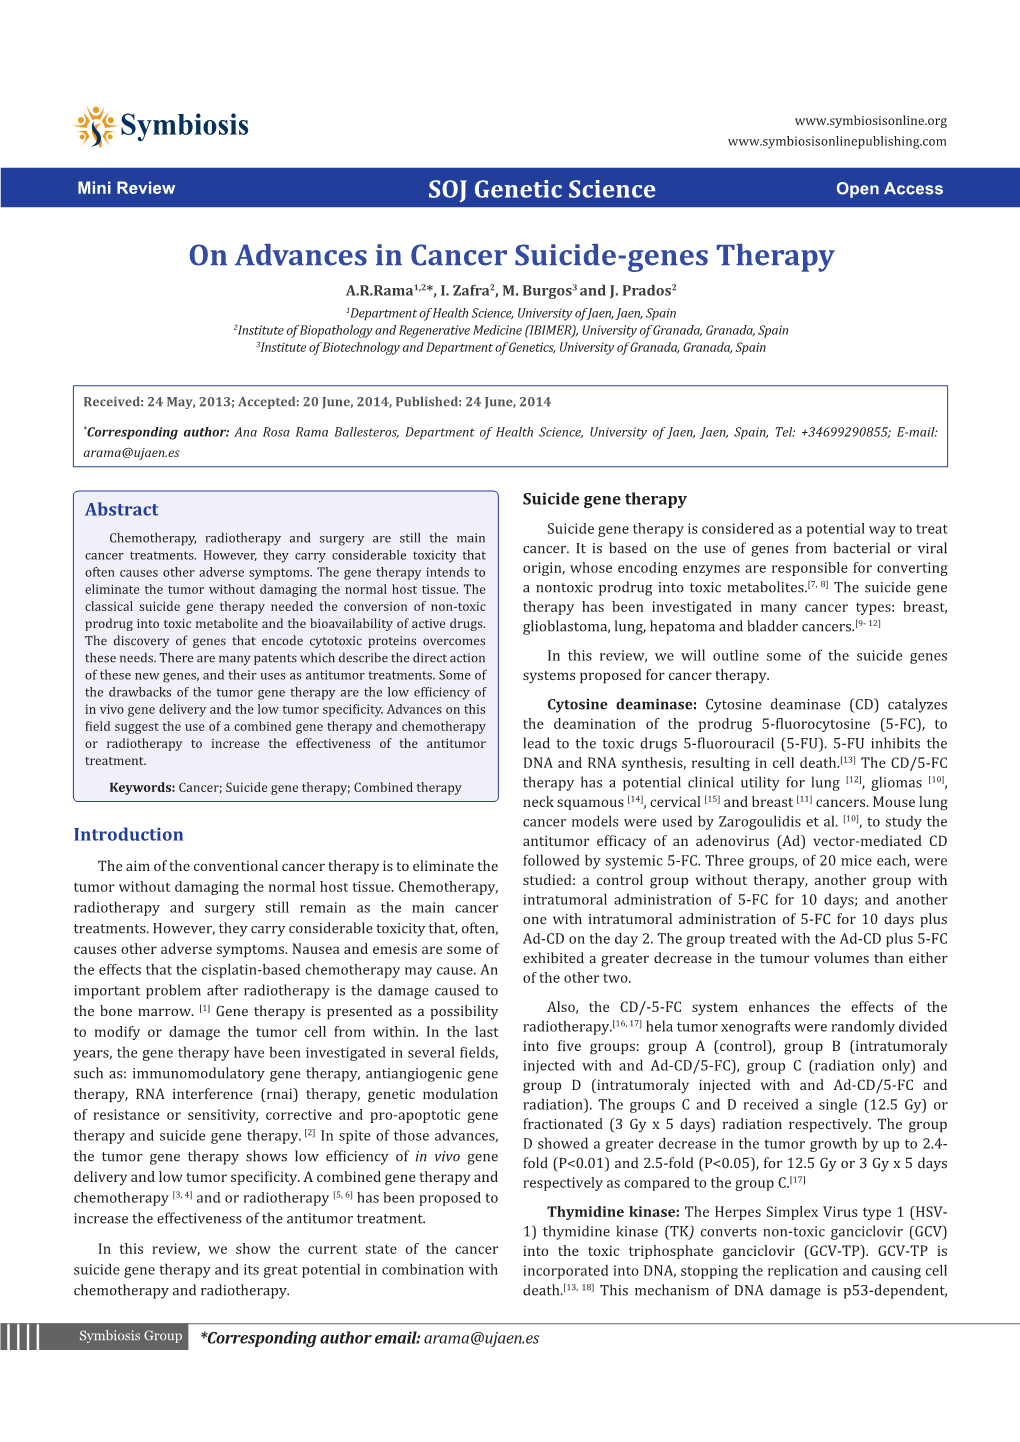 On Advances in Cancer Suicide-Genes Therapy A.R.Rama1,2*, I